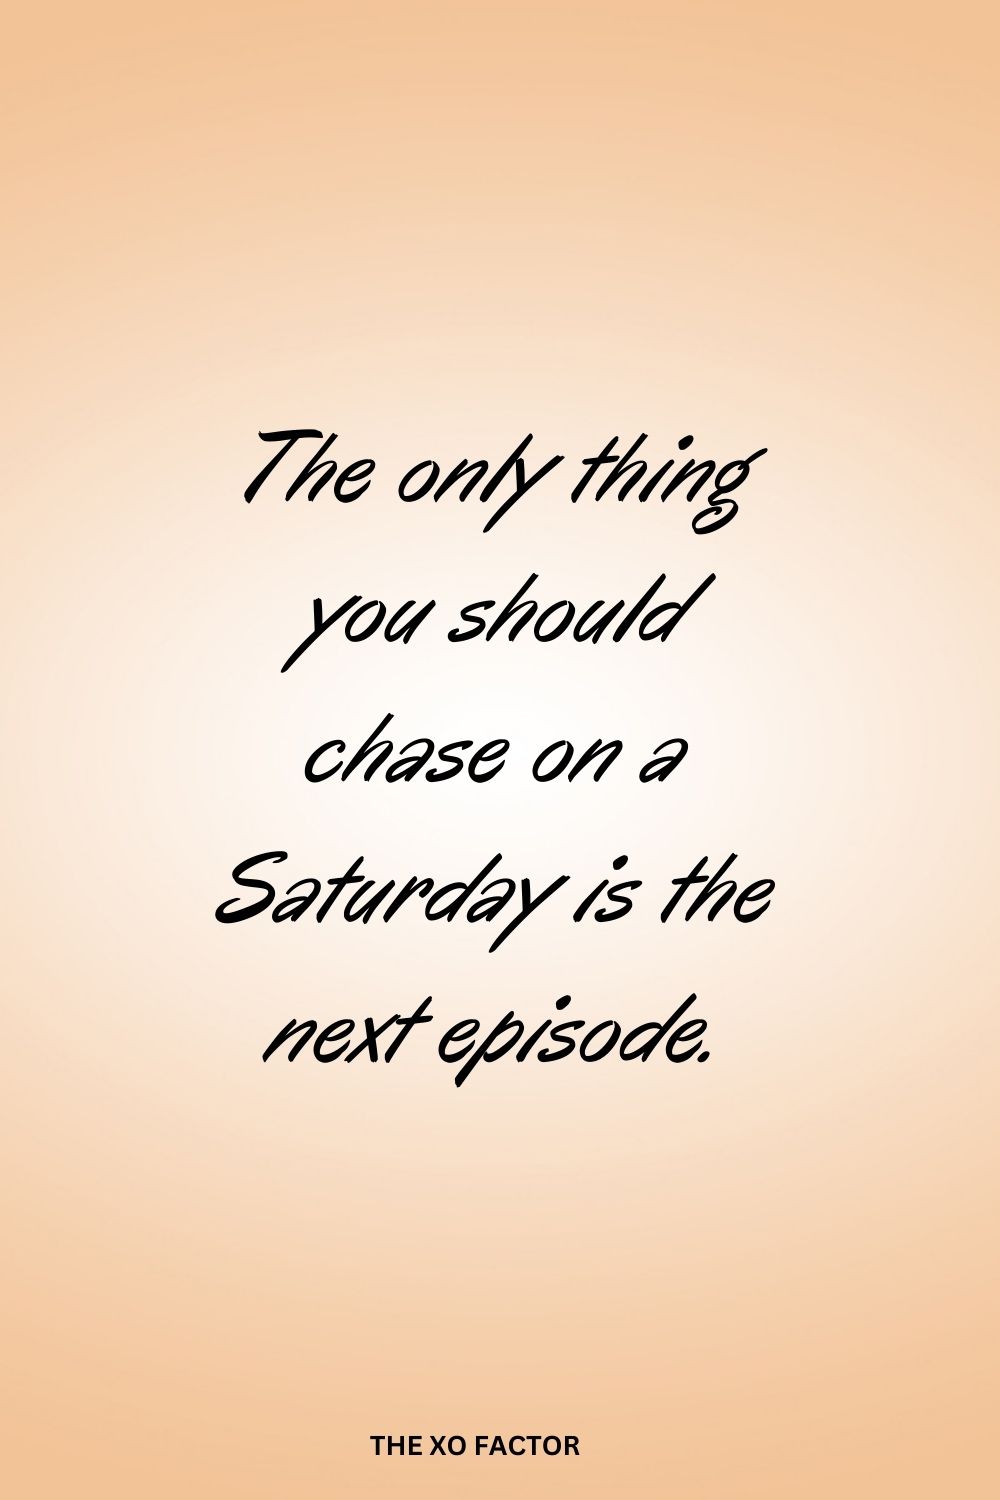 The only thing you should chase on a Saturday is the next episode.